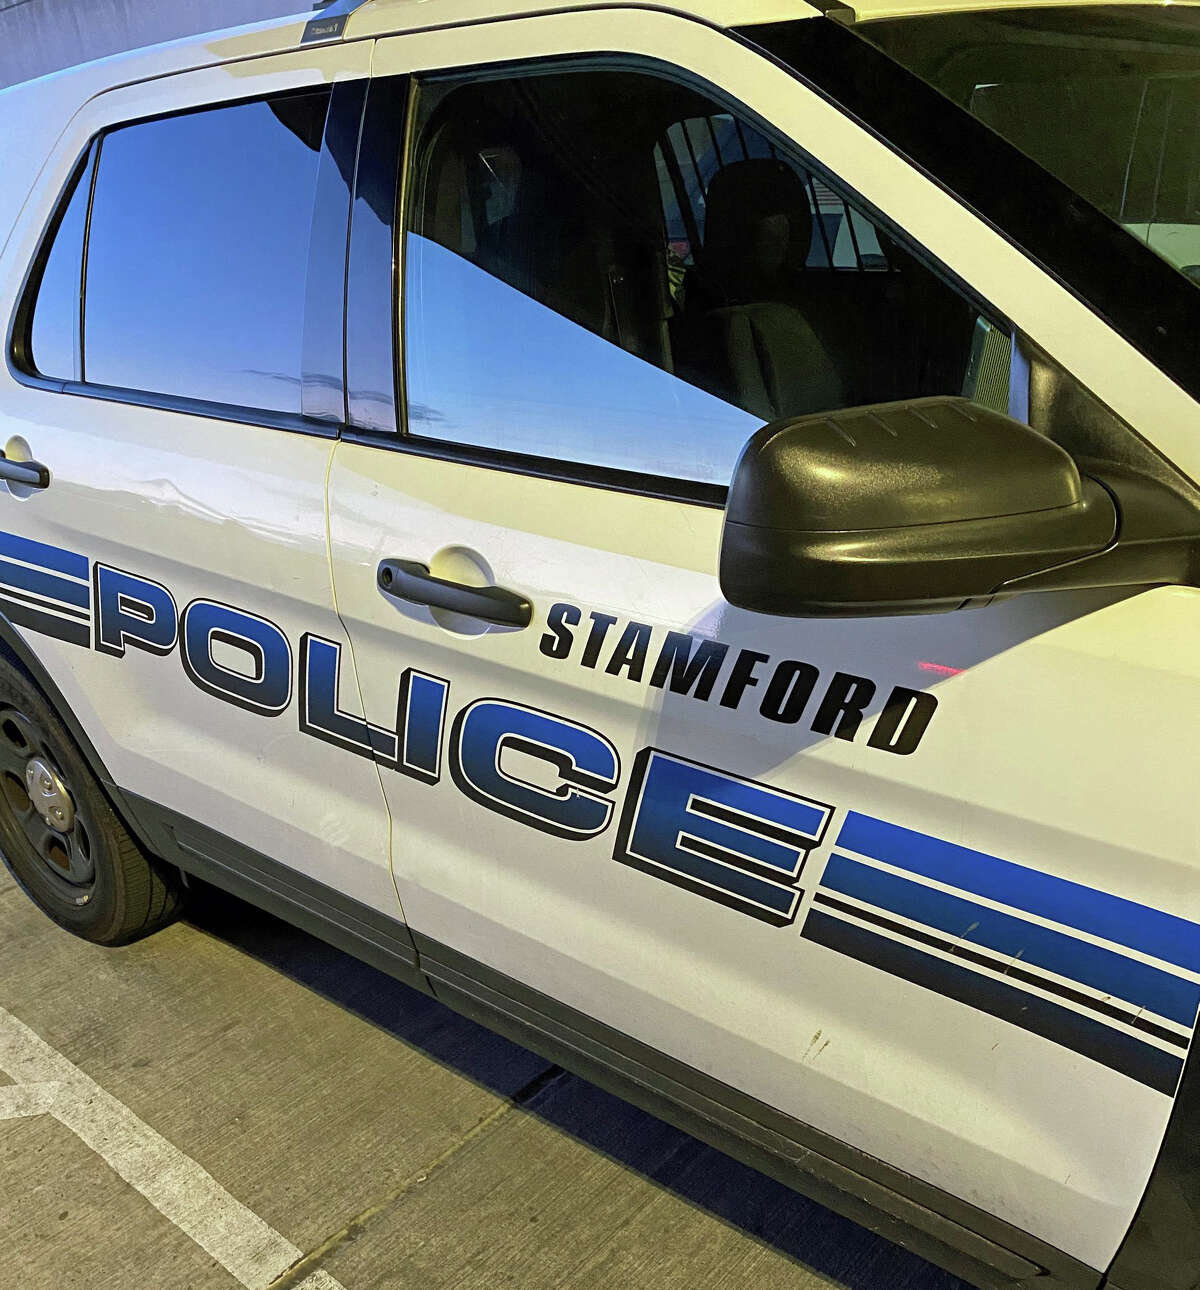 A Stamford woman is accused of stabbing a 71-year-old man three times following a verbal argument in November, according to police.